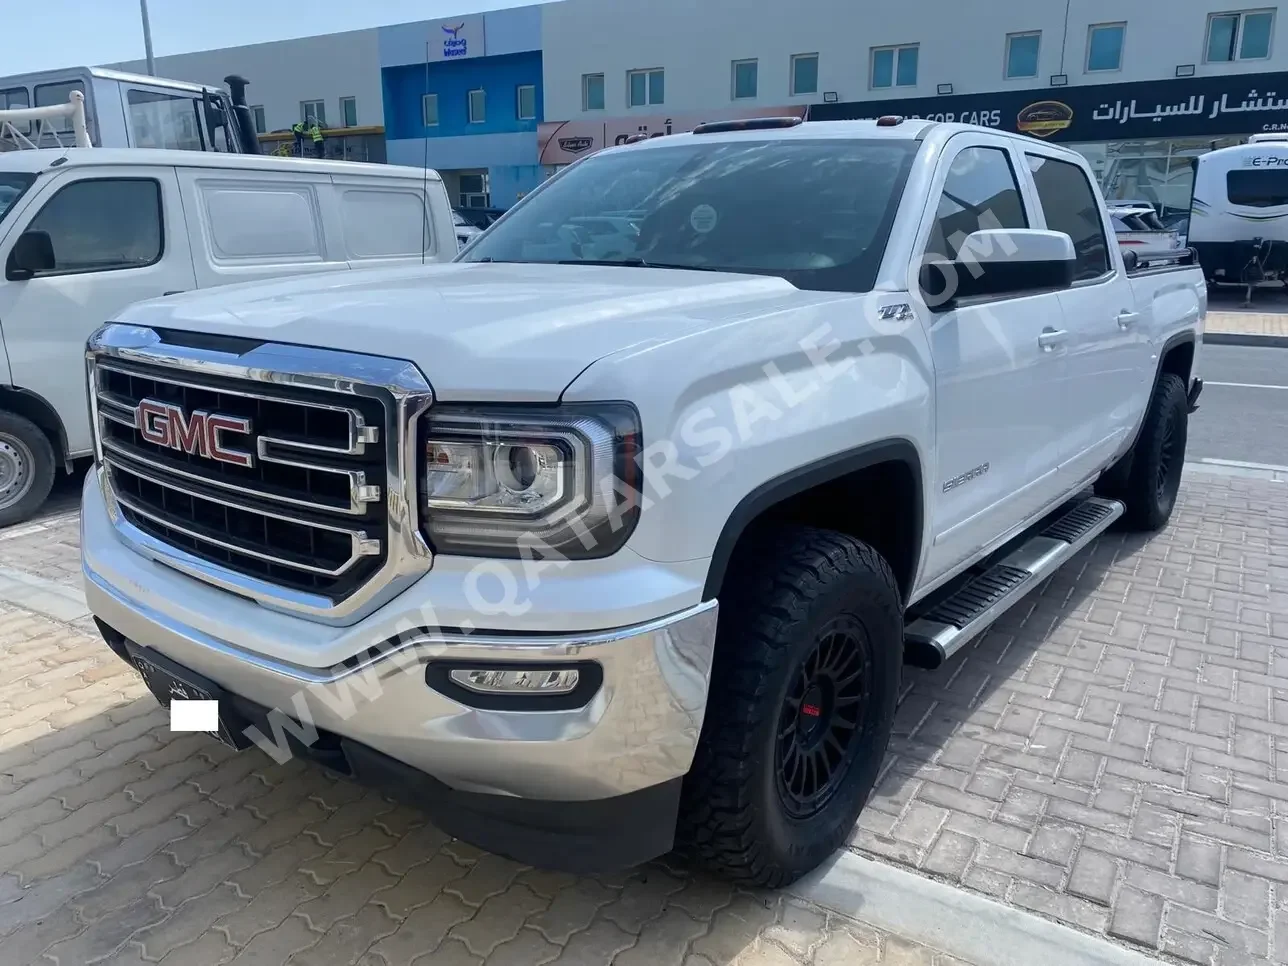 GMC  Sierra  2017  Automatic  108,000 Km  8 Cylinder  Four Wheel Drive (4WD)  Pick Up  White